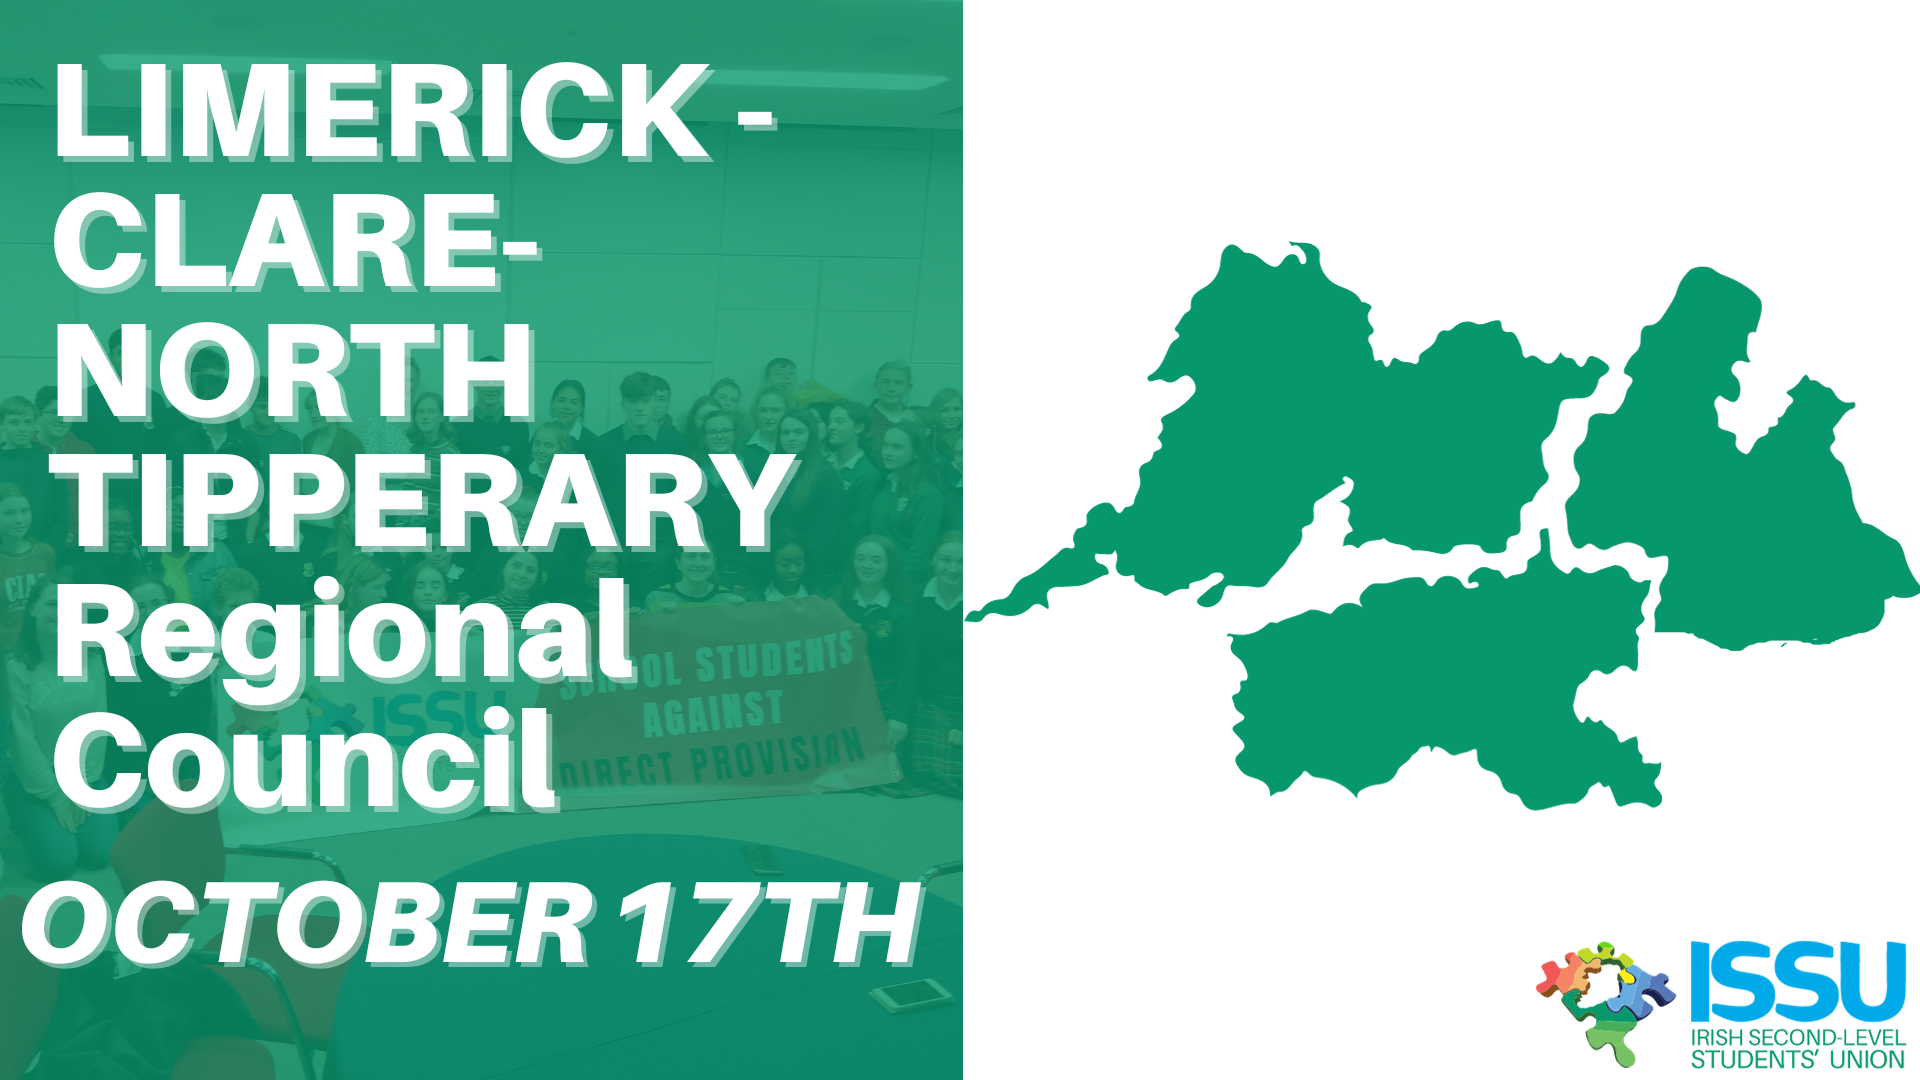 Limerick - Clare - North Tipp Regional Council (2).png